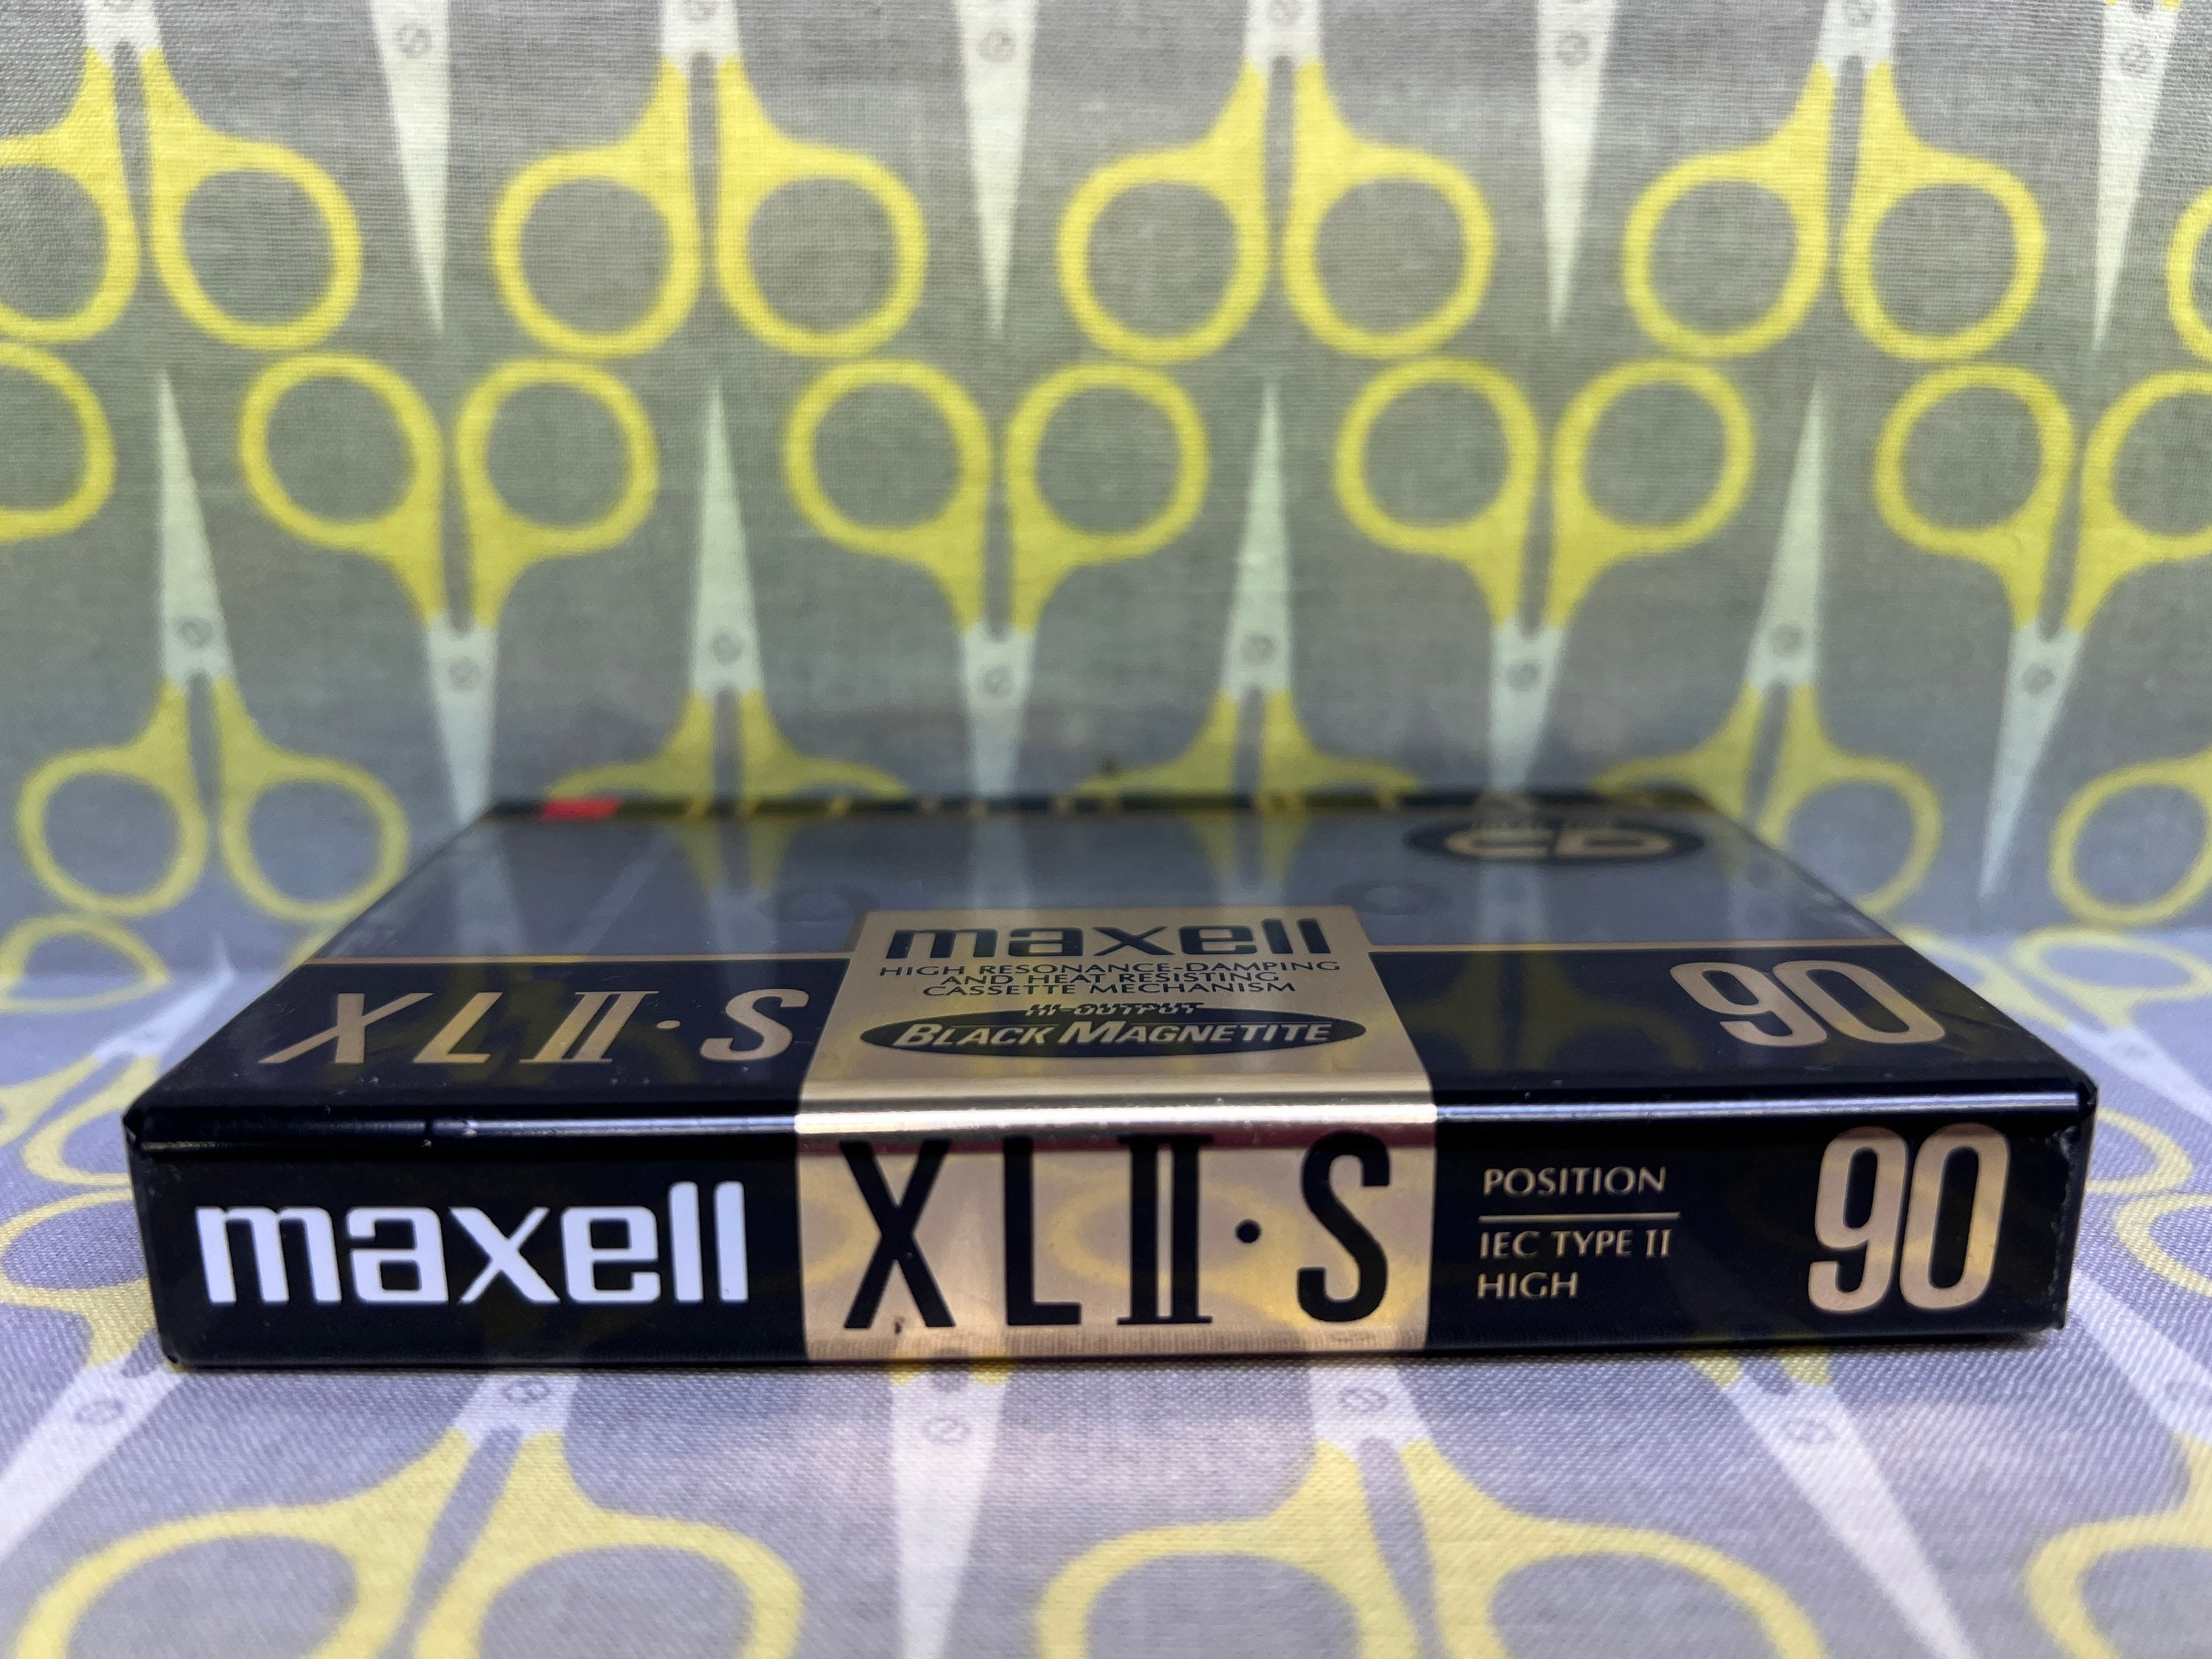 Sealed Maxell XL II S 90 Blank Audio Cassette Tape Position IEC Type High -   Canada